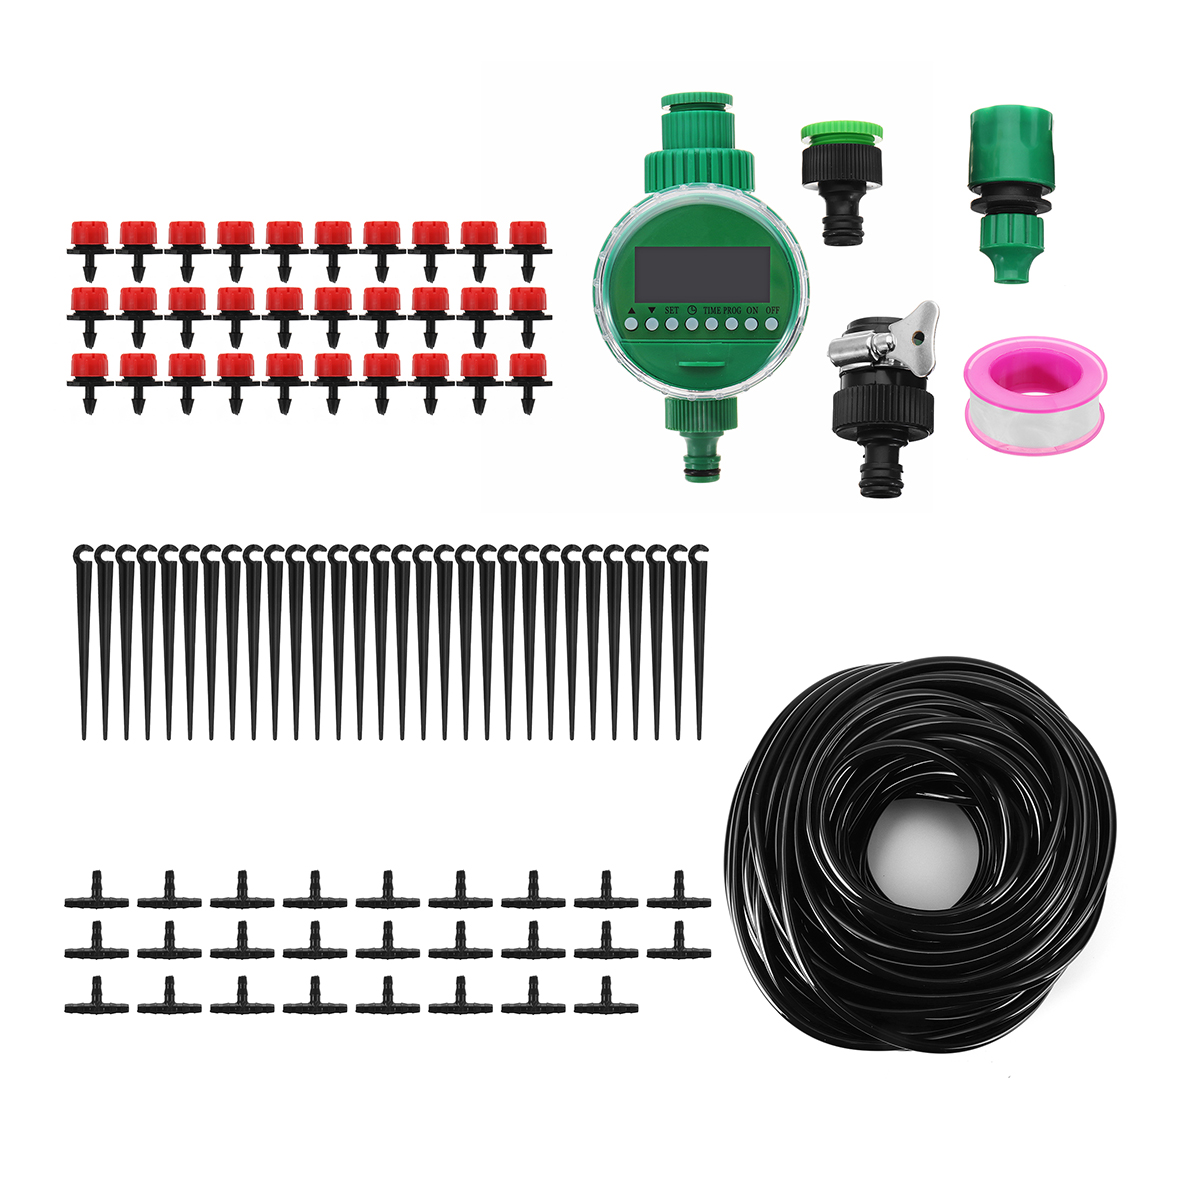 DIY-Irrigation-System-Water-Timer-Auto-Sprinkler-Plant-Watering-with-Adapter-Irrigation-Timer-1353521